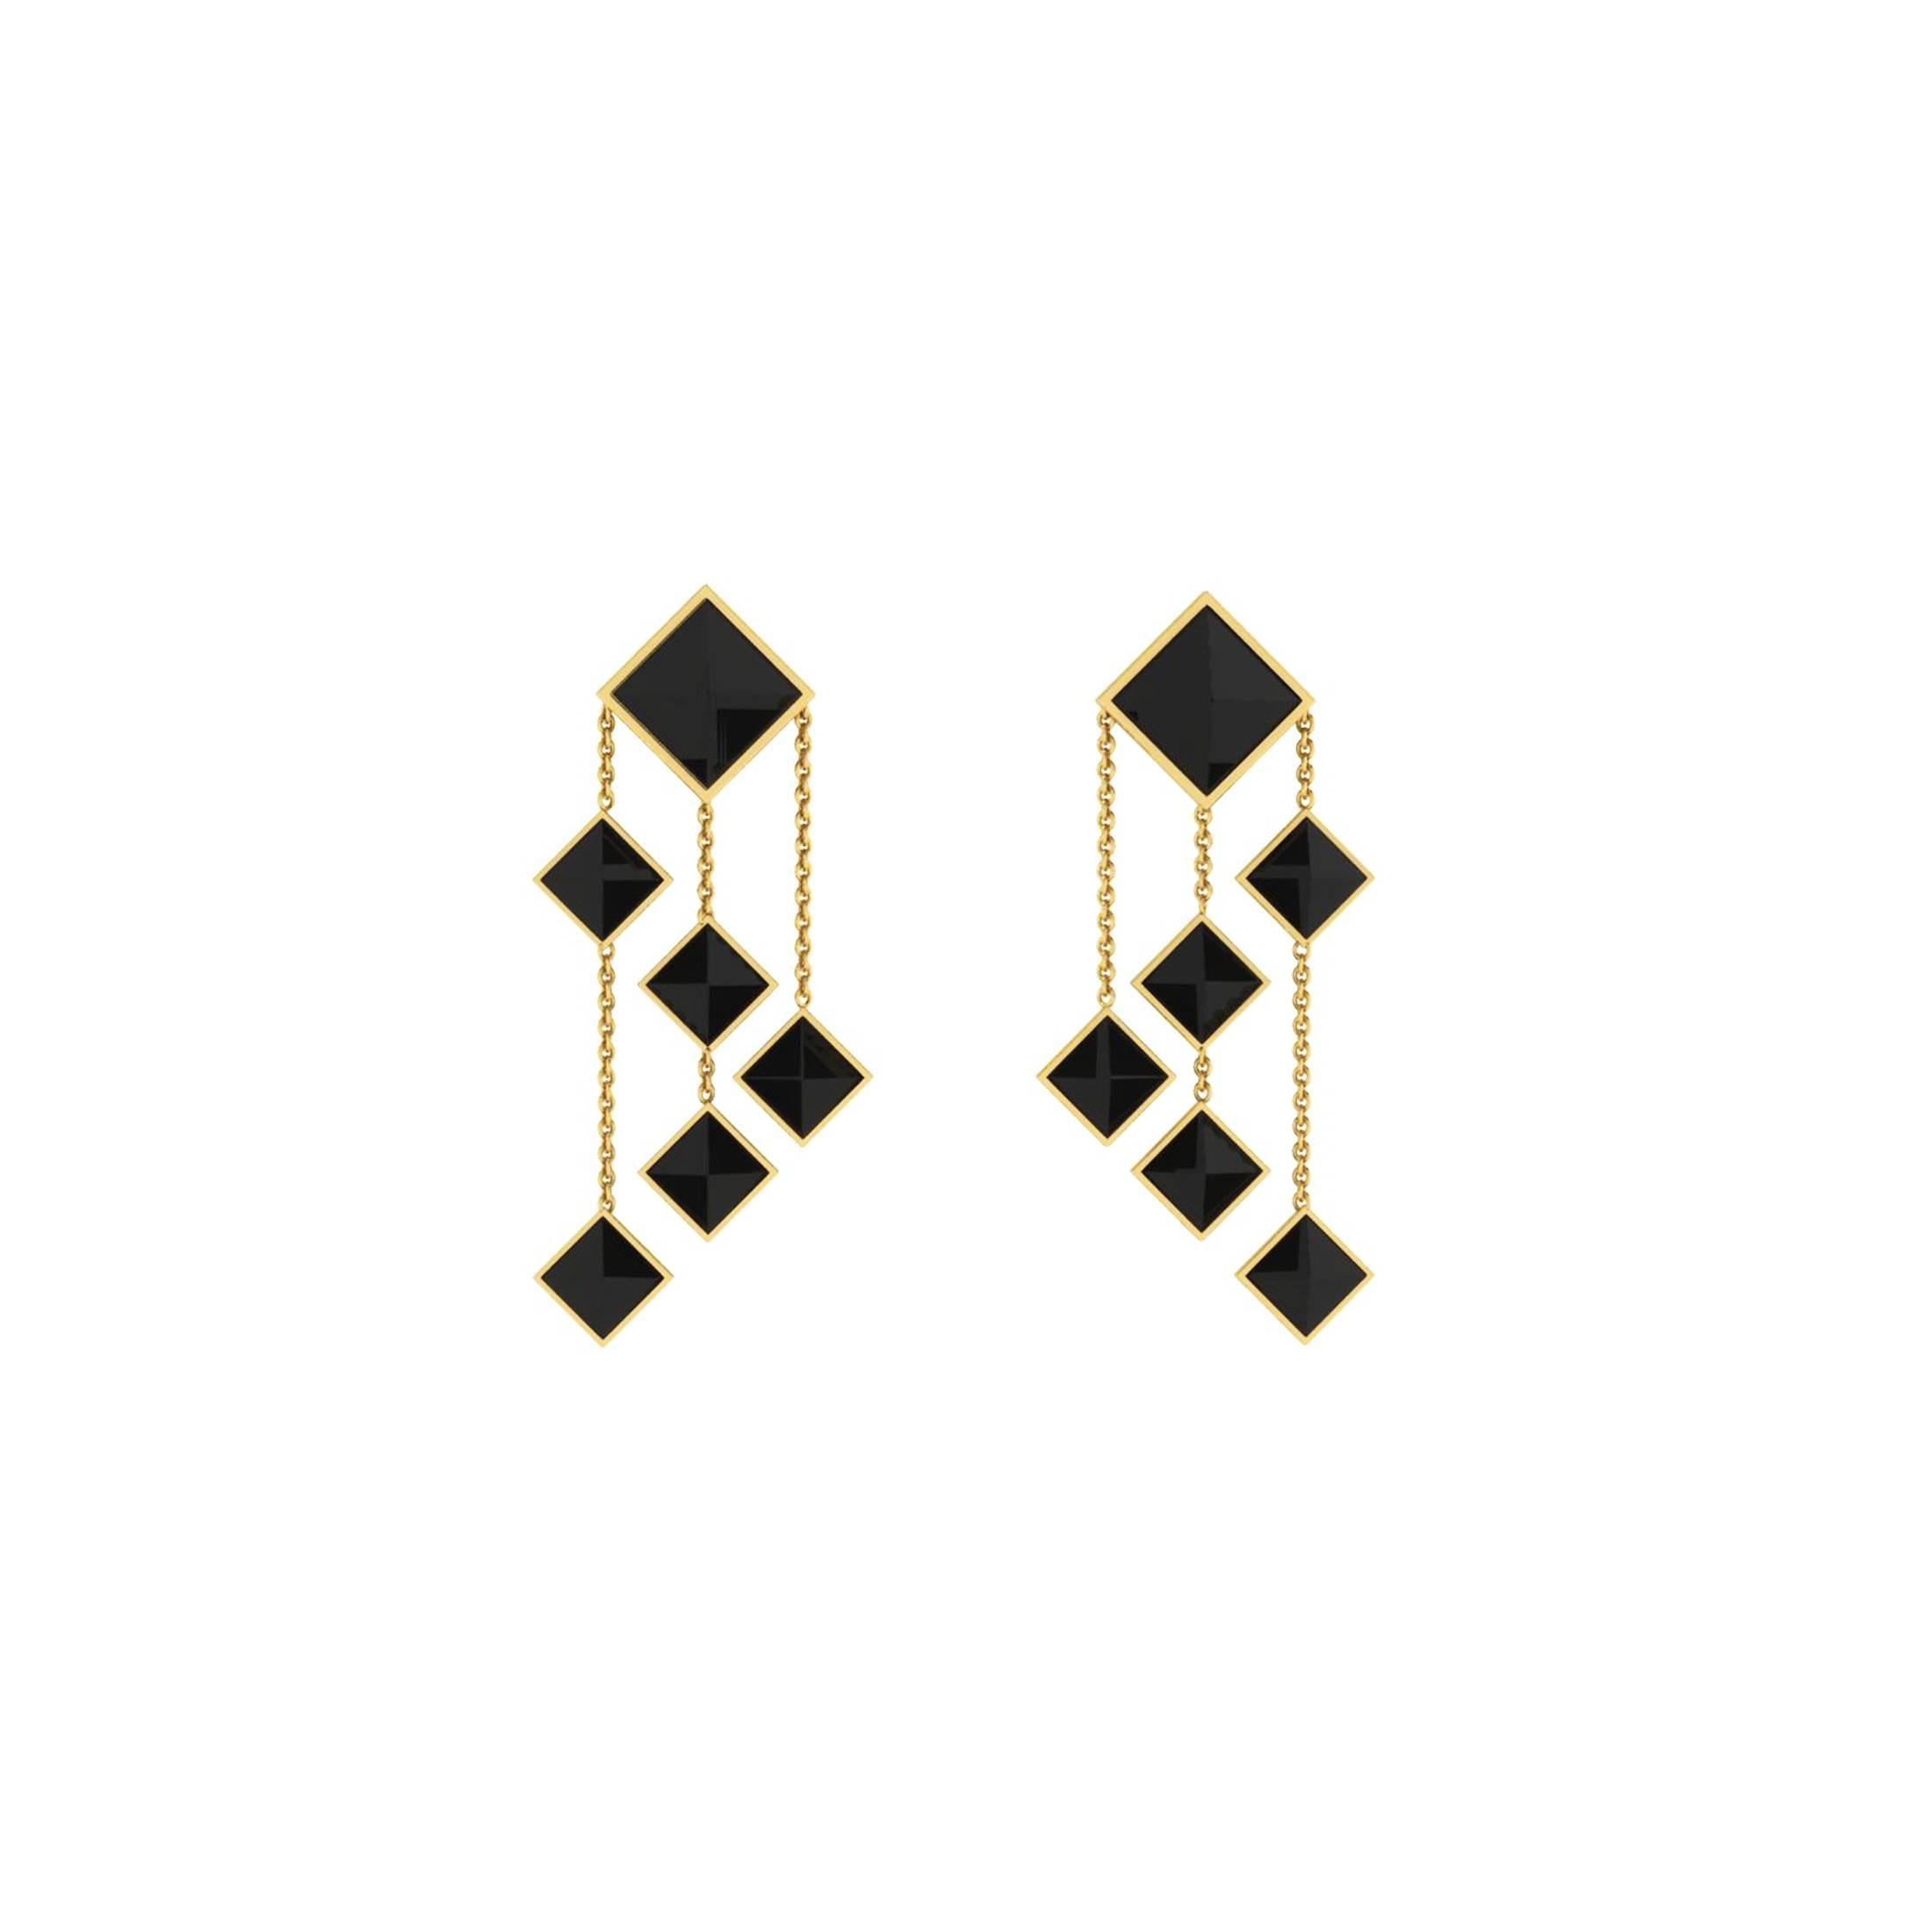 Black Onyx Pyramids Dangling 18 Karat Yellow Gold Chandelier Earrings In New Condition For Sale In New York, NY